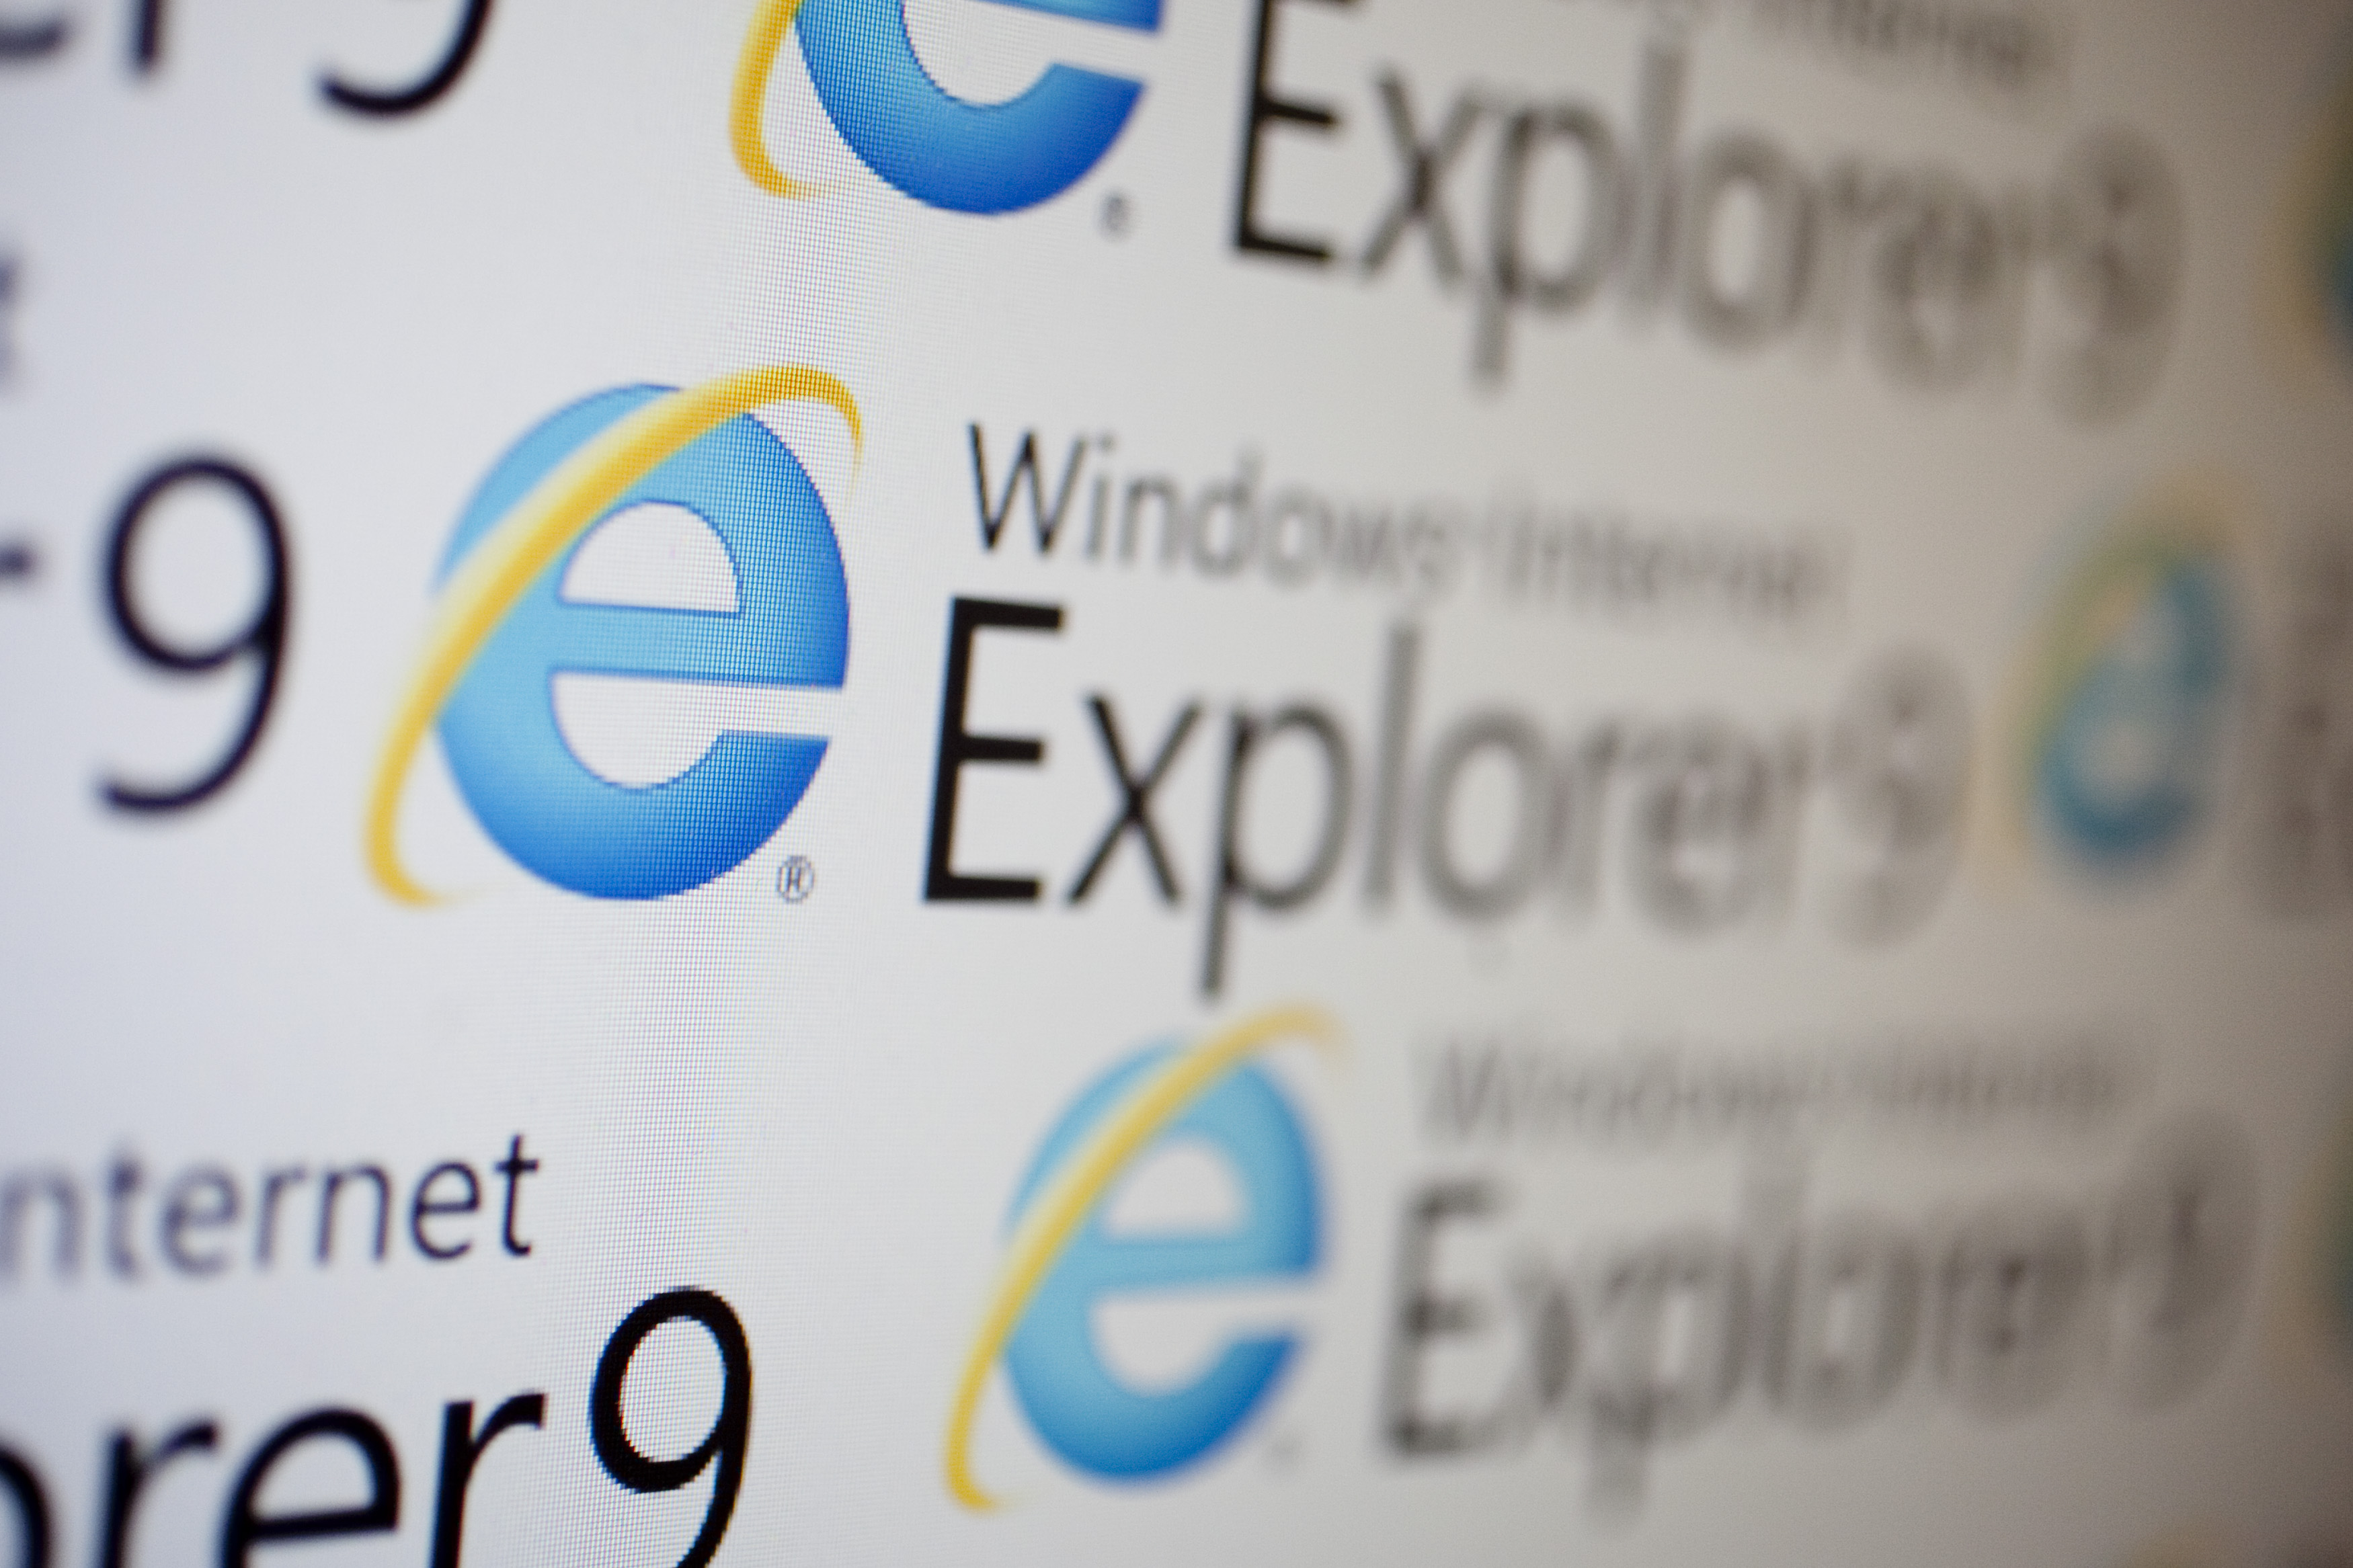 Warning over Internet Explorer zero-day being exploited in targeted attacks